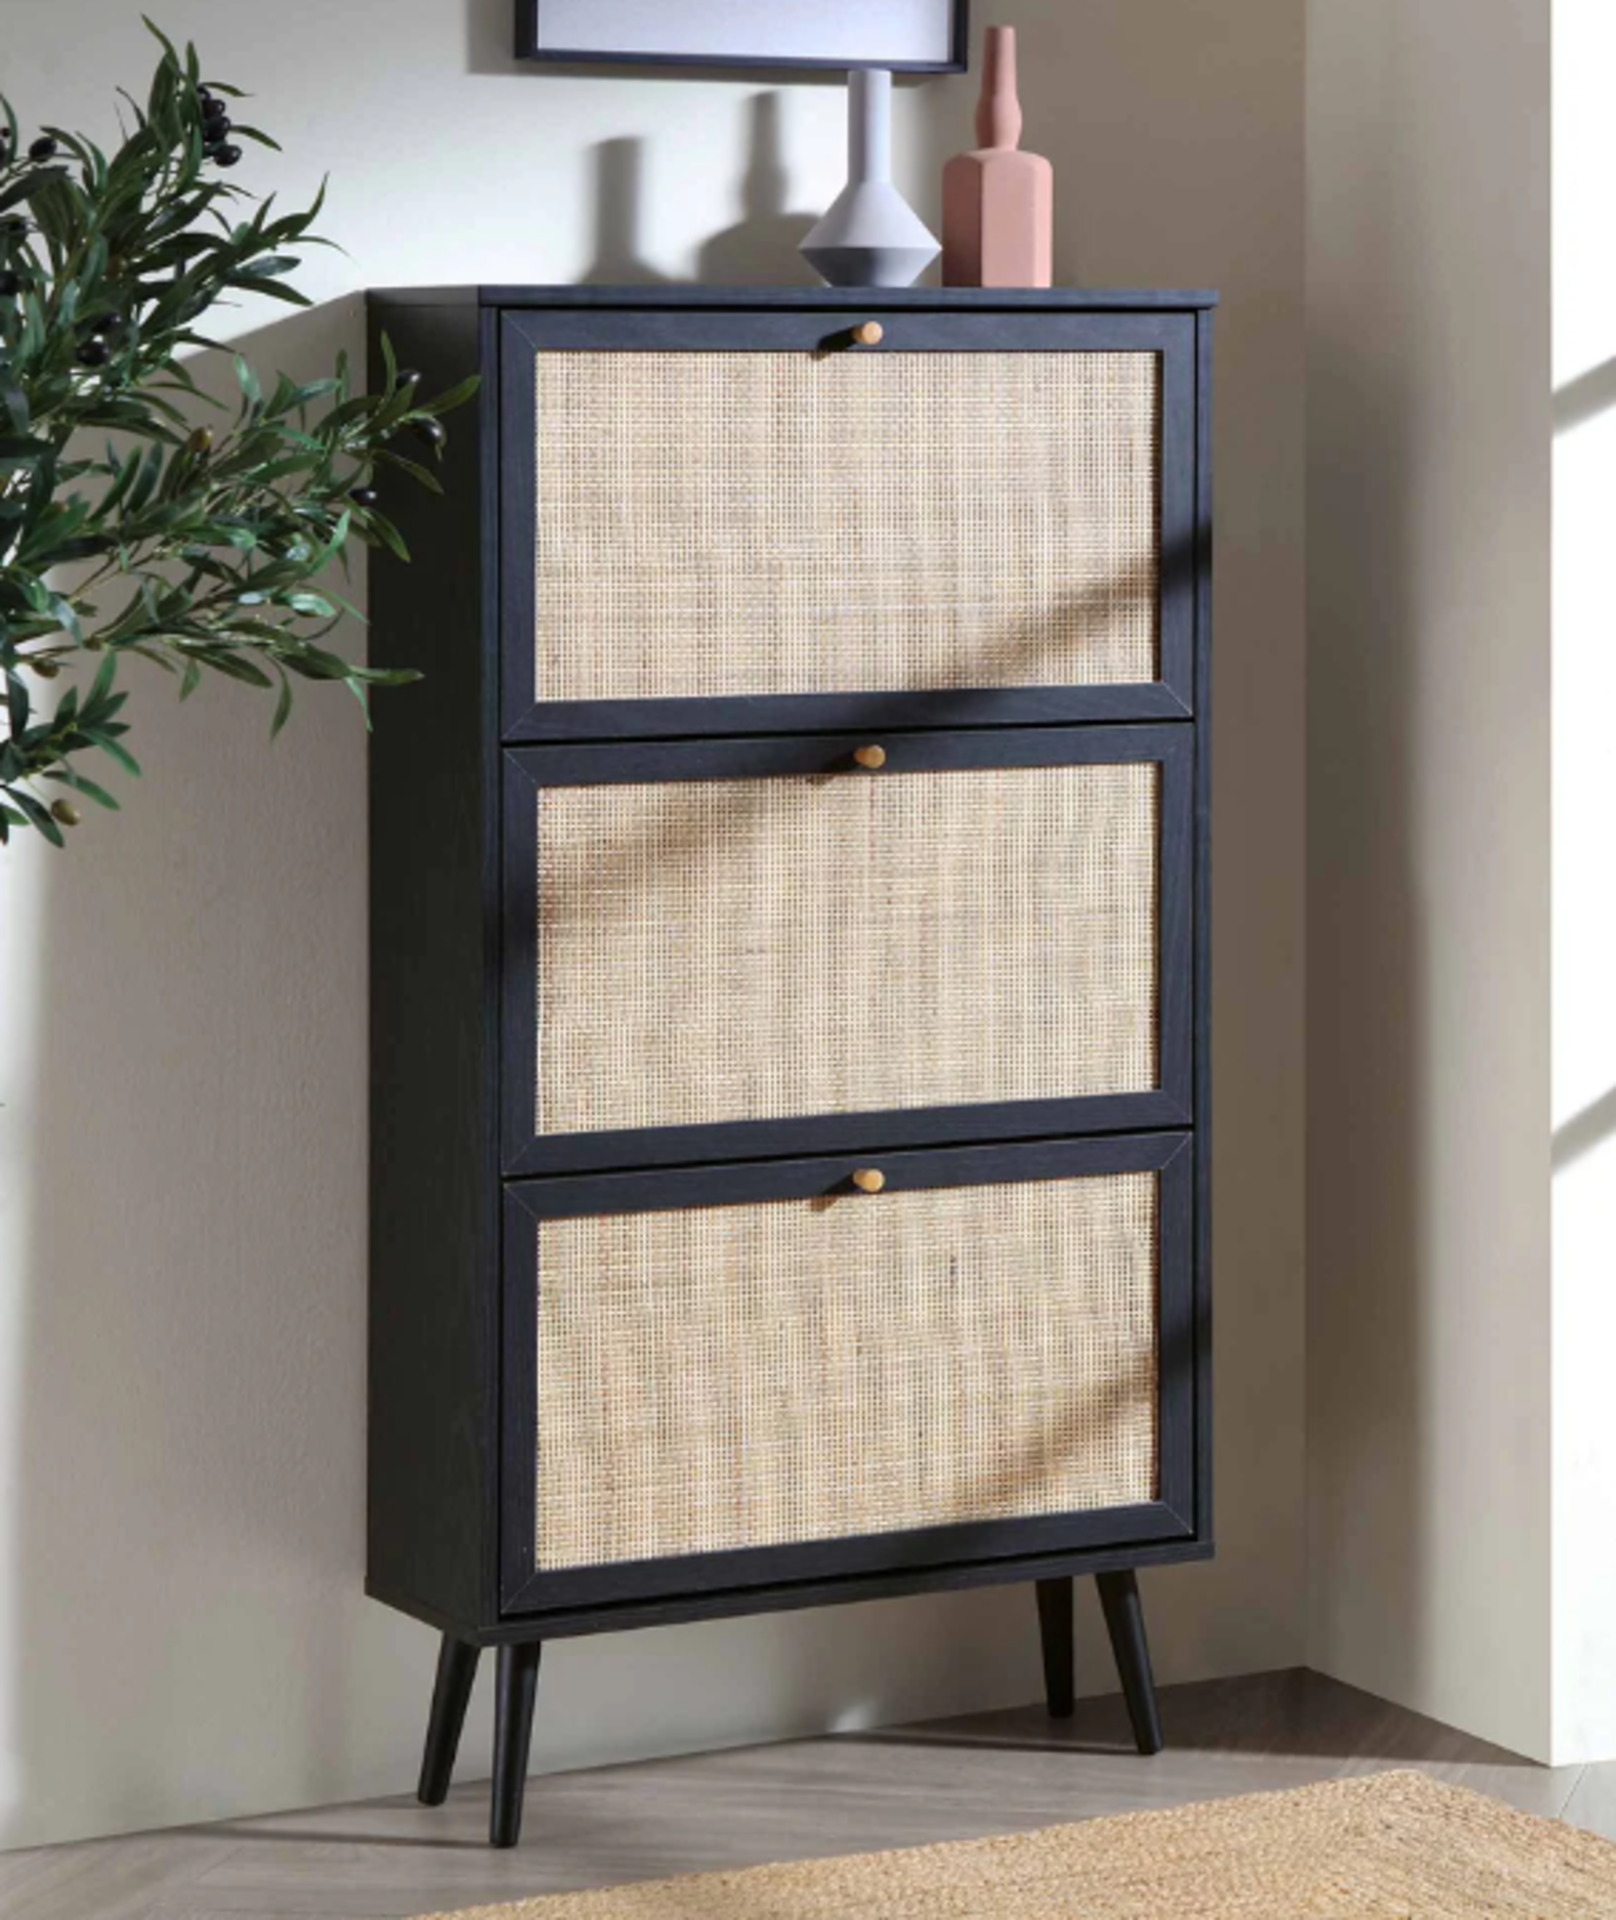 Frances Rattan 3 Tier Shoe Storage Cabinet, Black. - SR6. RRP £219.99. Crafted from natural rattan